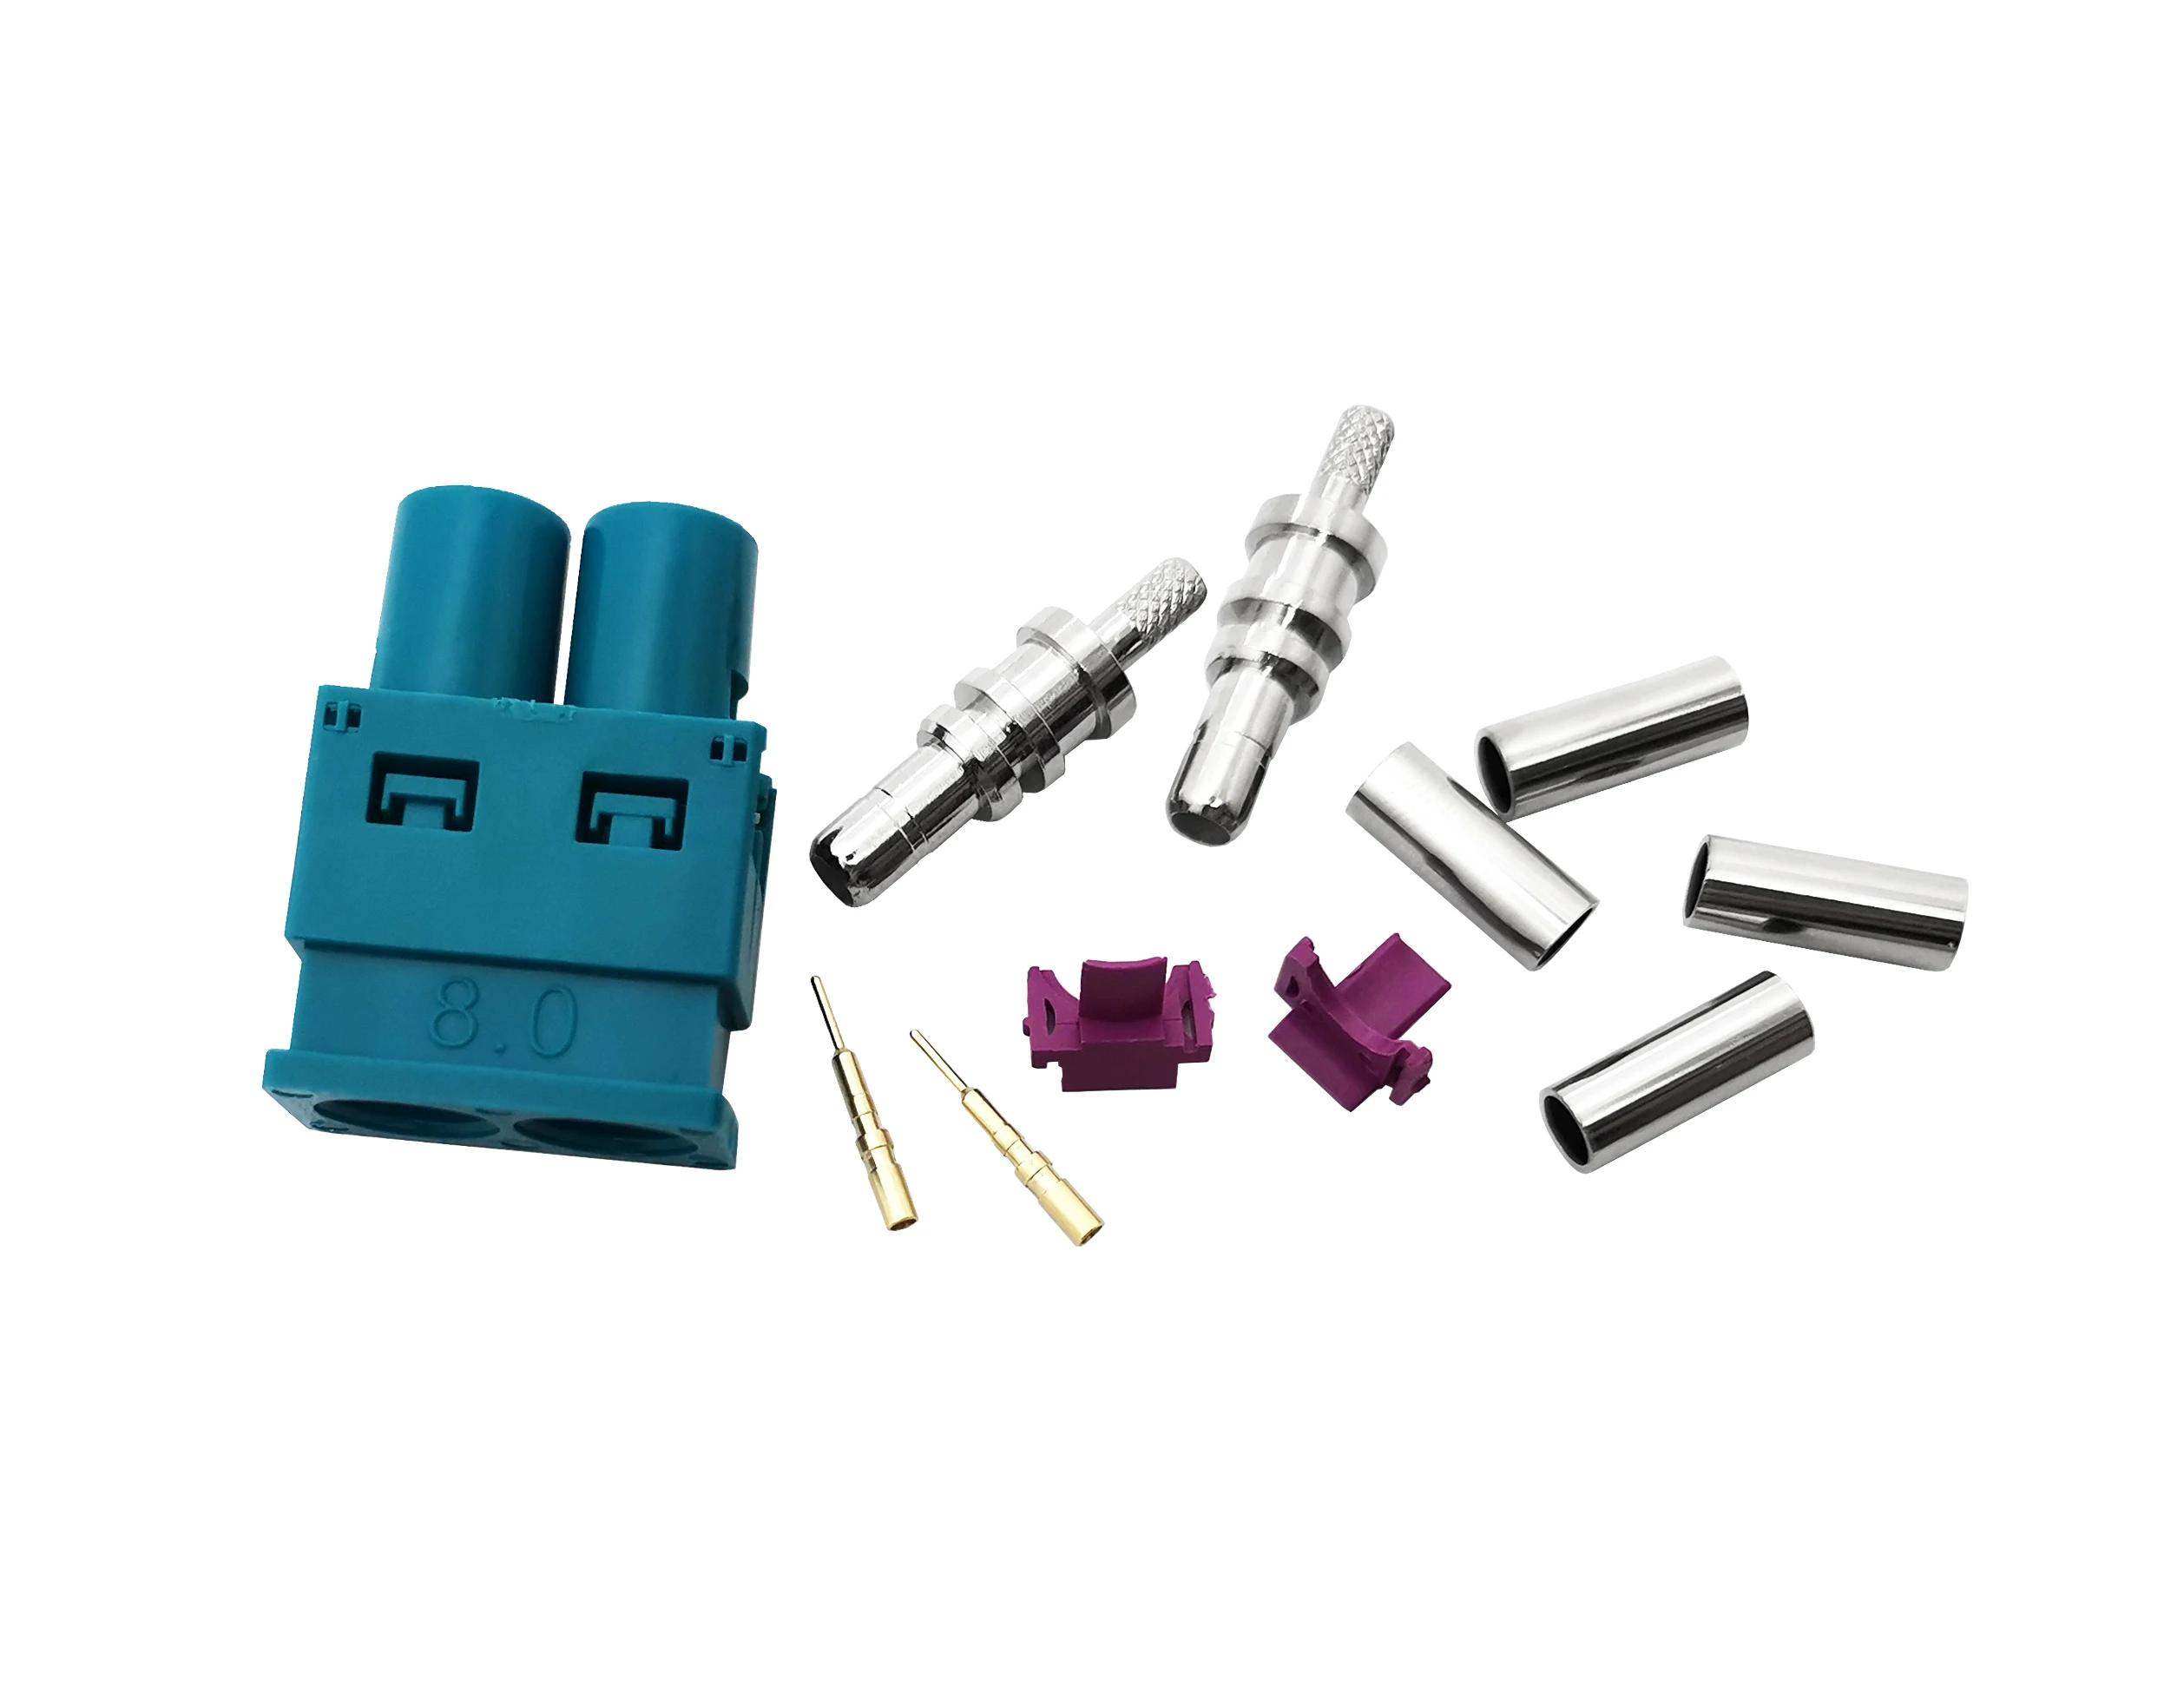 RF Coaxial SMB Female Jack water blue Double fakra Crimp Straight Connector for rg316 rg174 Cable Fakra details